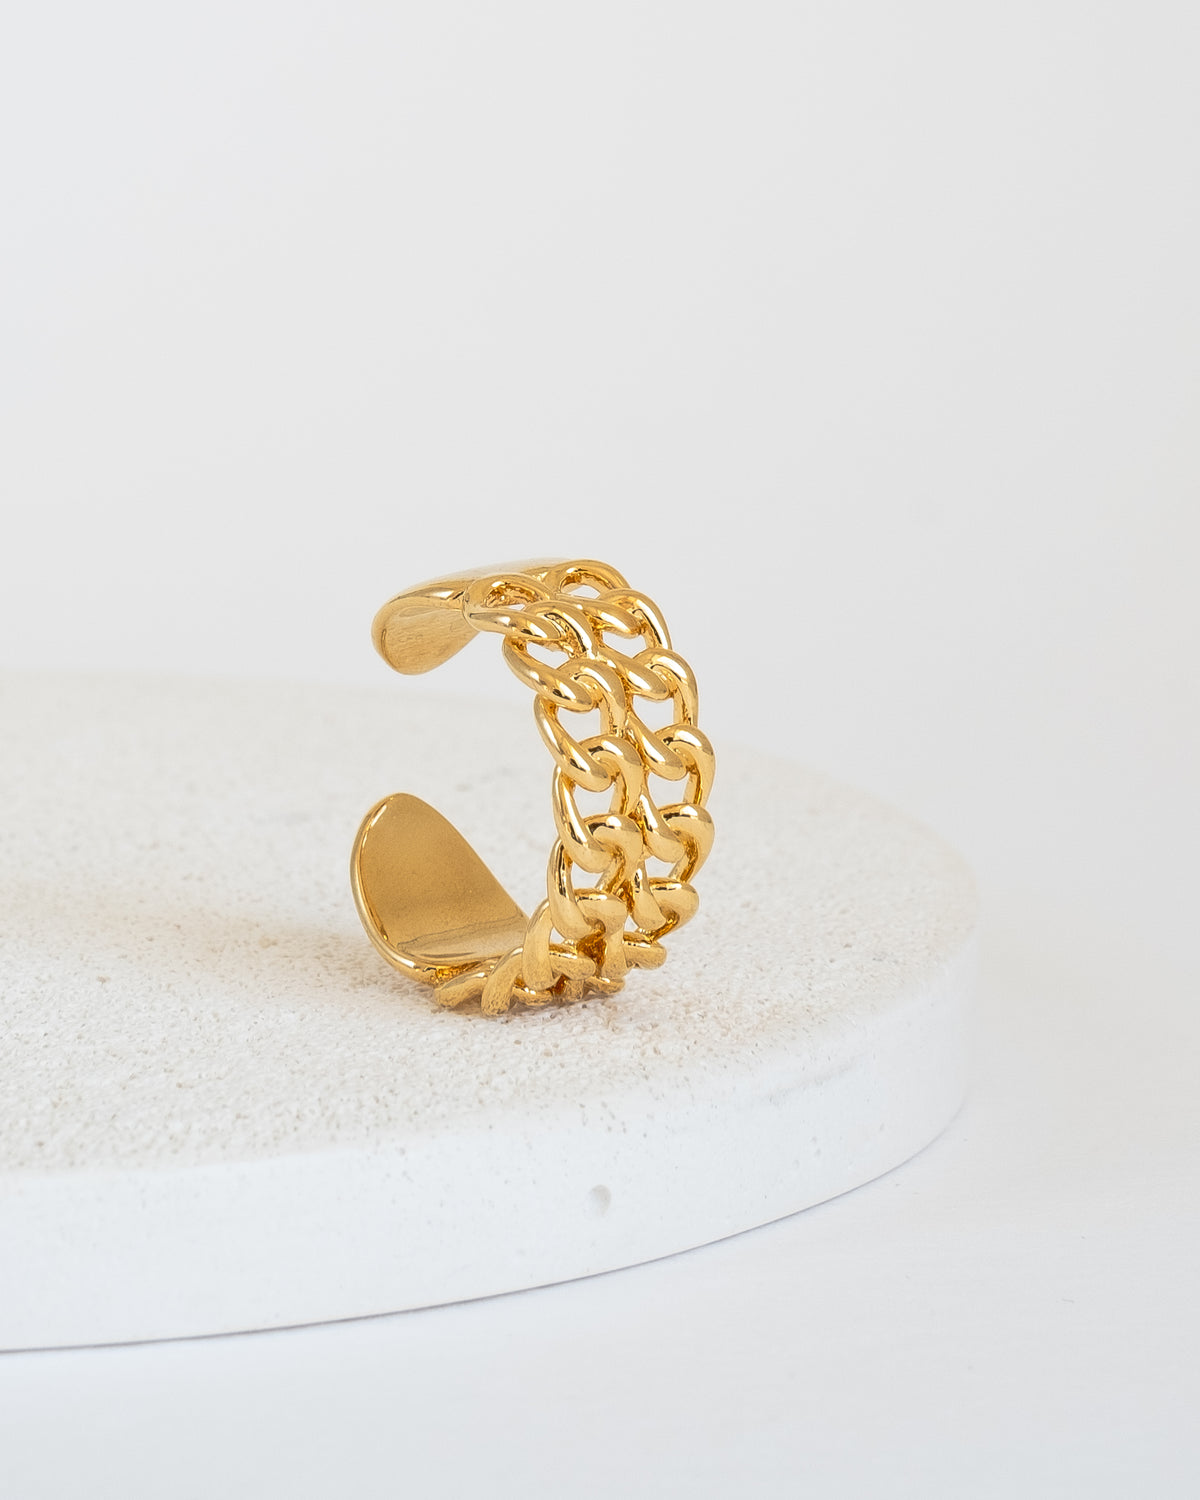 Adjustable chain link ring 18K Gold Filled Ring freeshipping - Ollijewelry